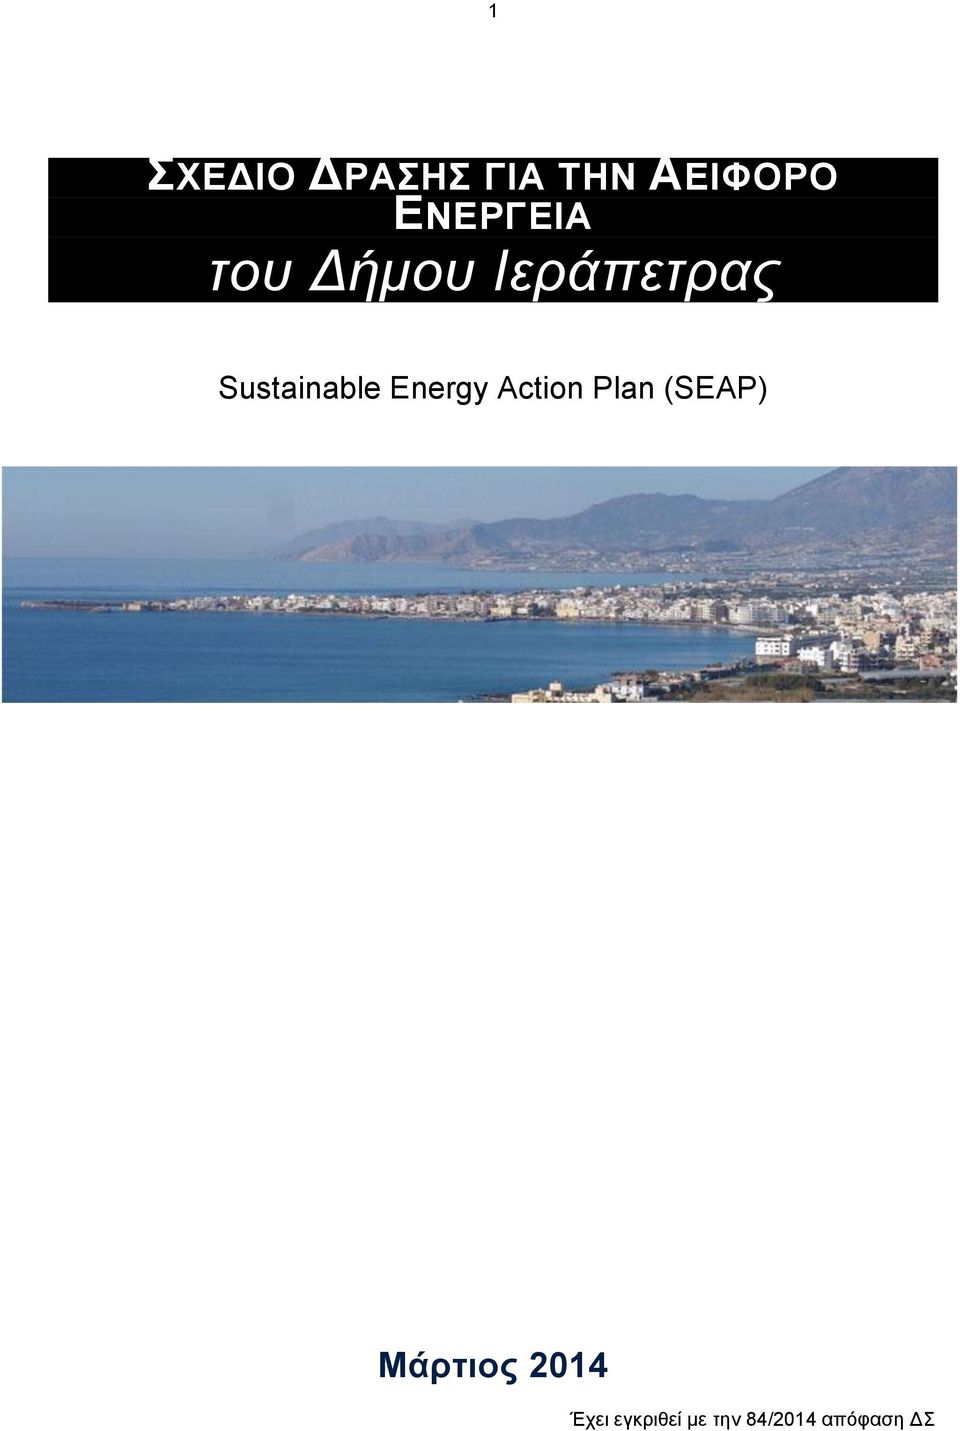 Sustainable Energy Action Plan (SEAP)